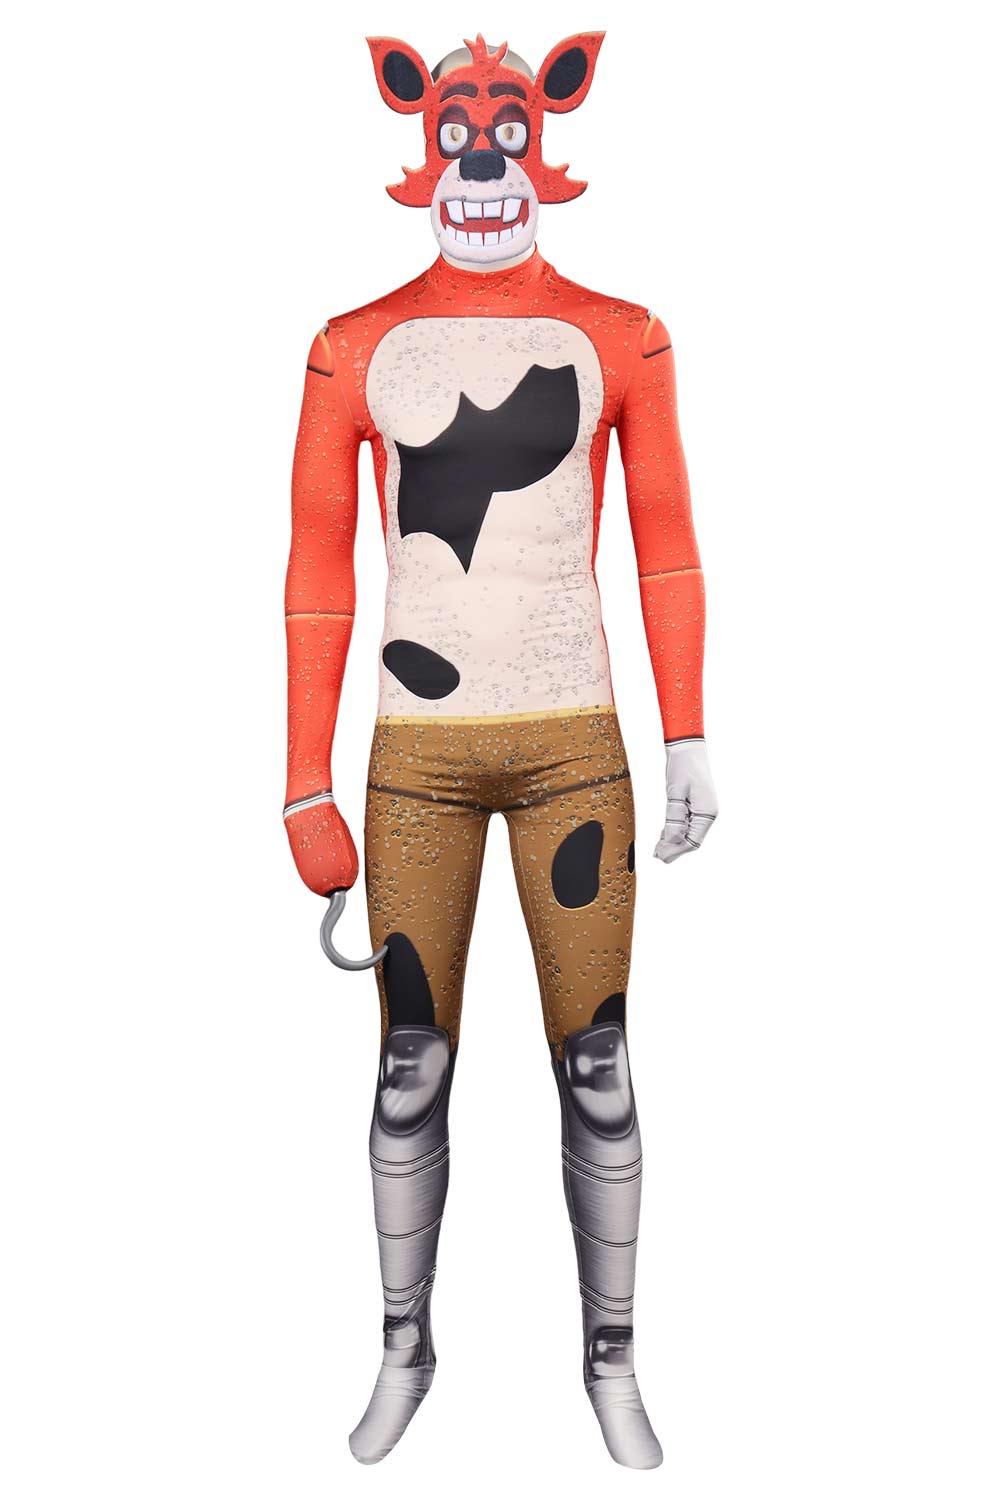 Game Five Nights at Freddy's Foxy Jumpsuit Outfits Halloween Carnival Suit Cosplay Costume